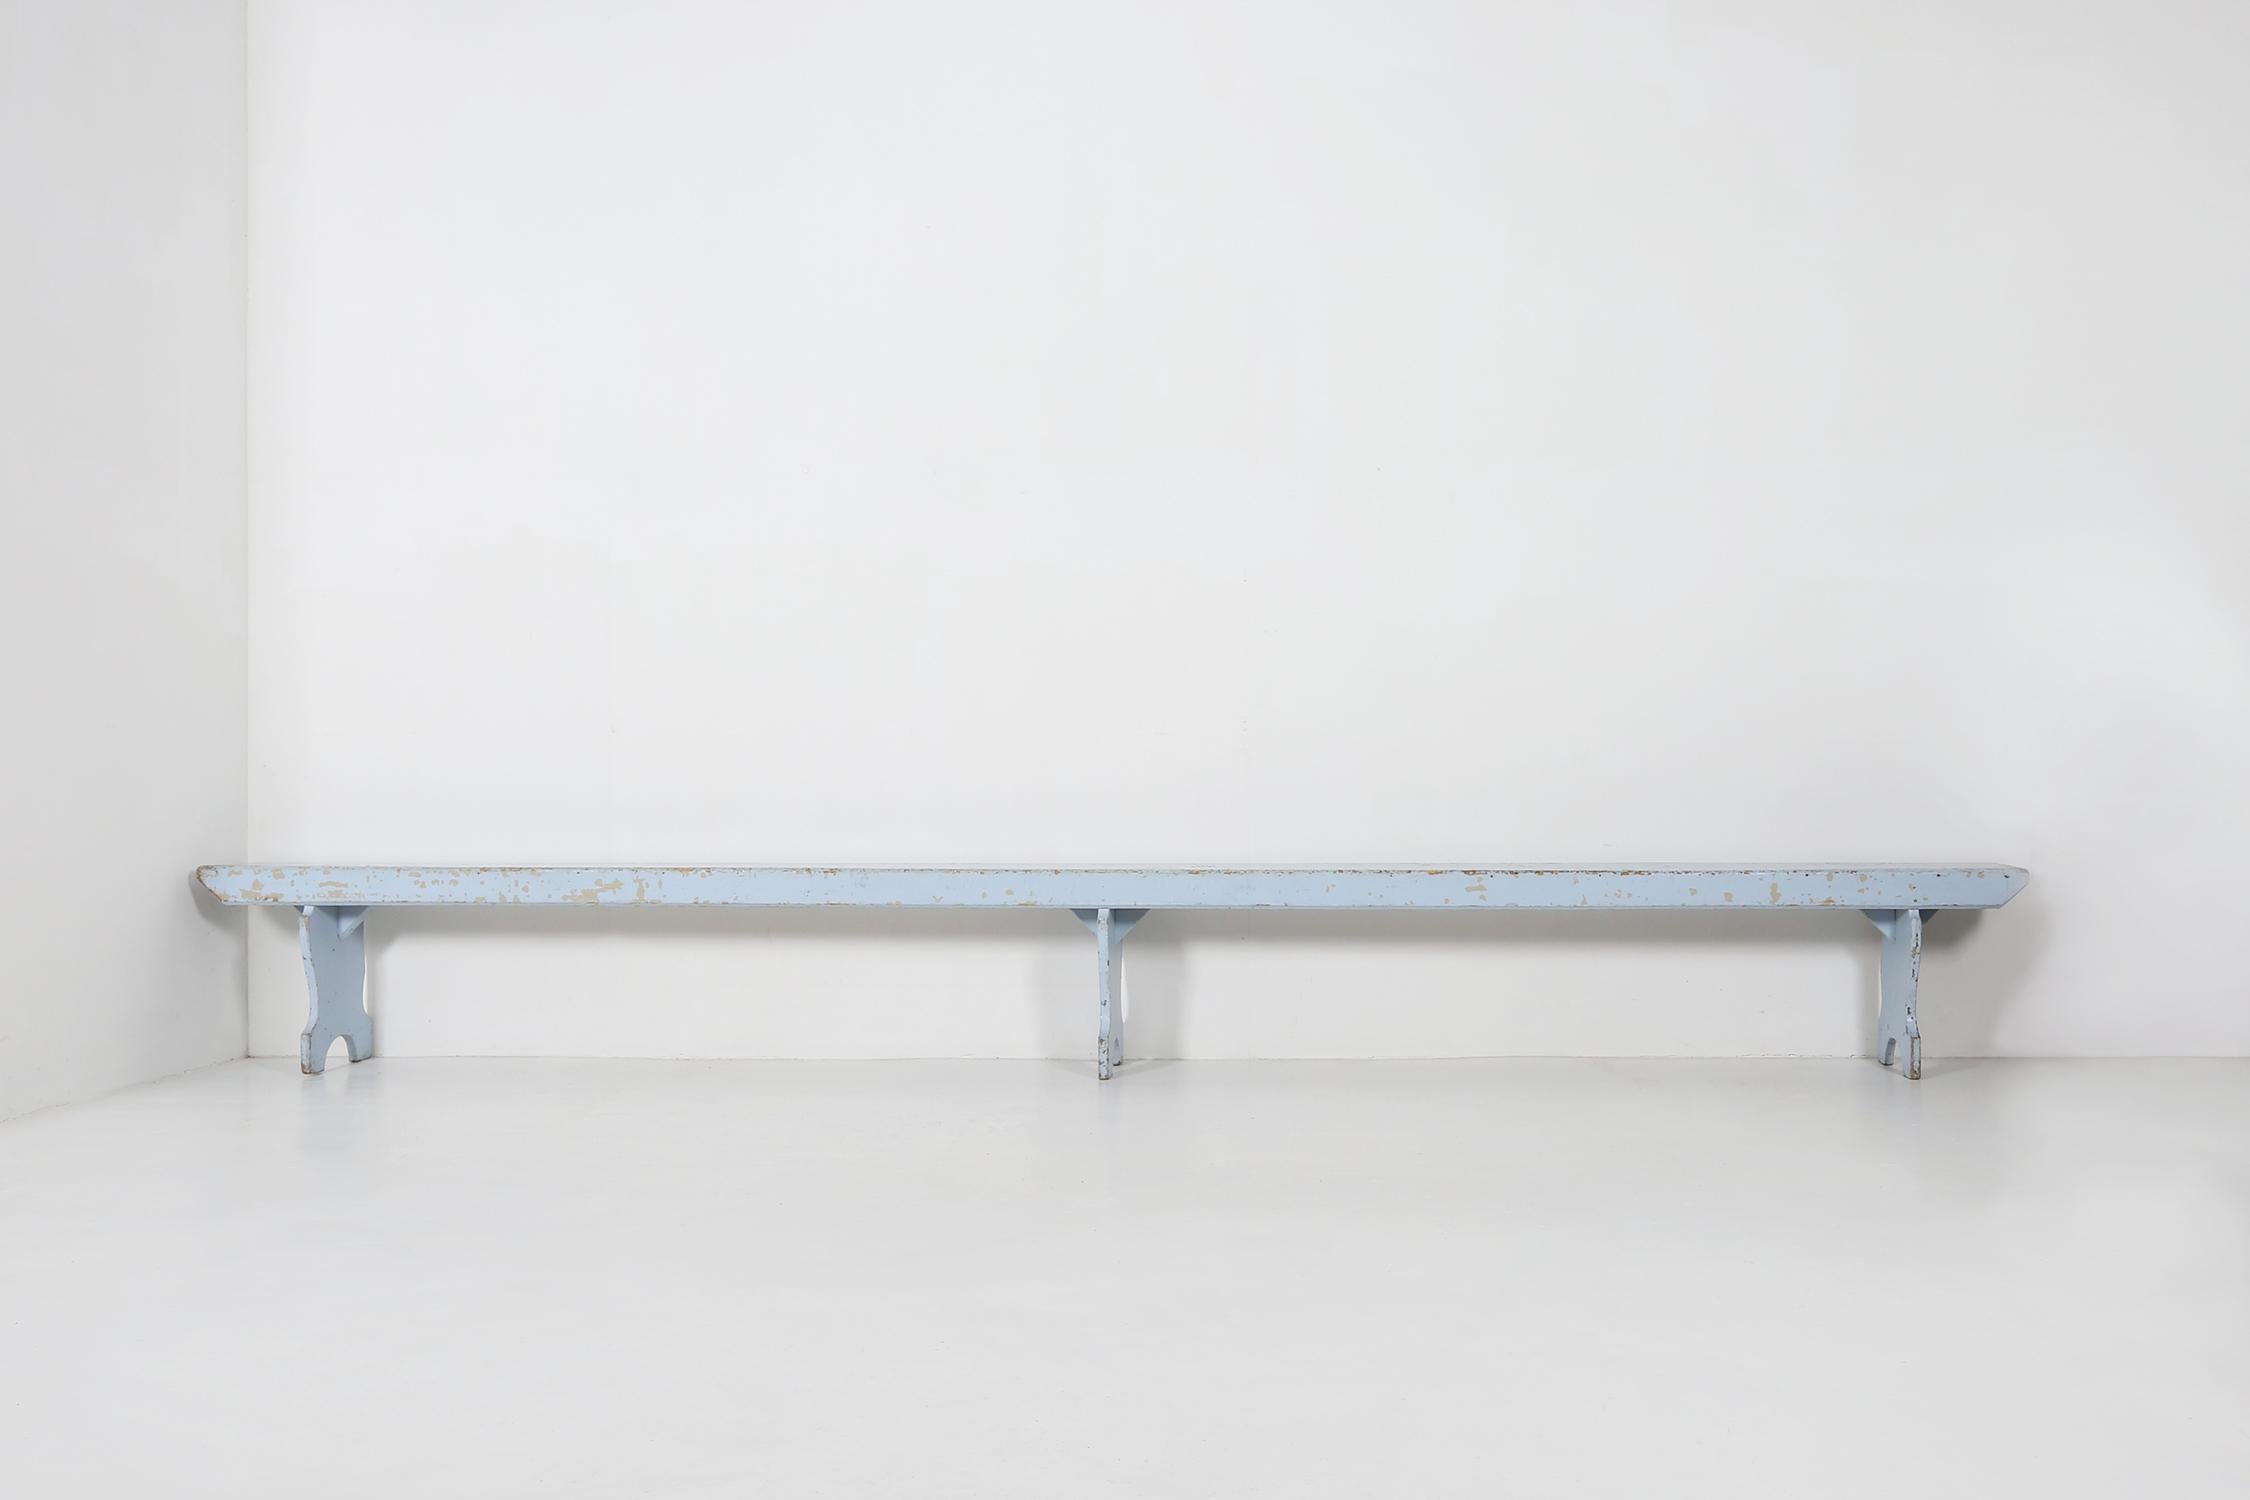 Big industrial wooden bench in blue color.
Has some great patina.